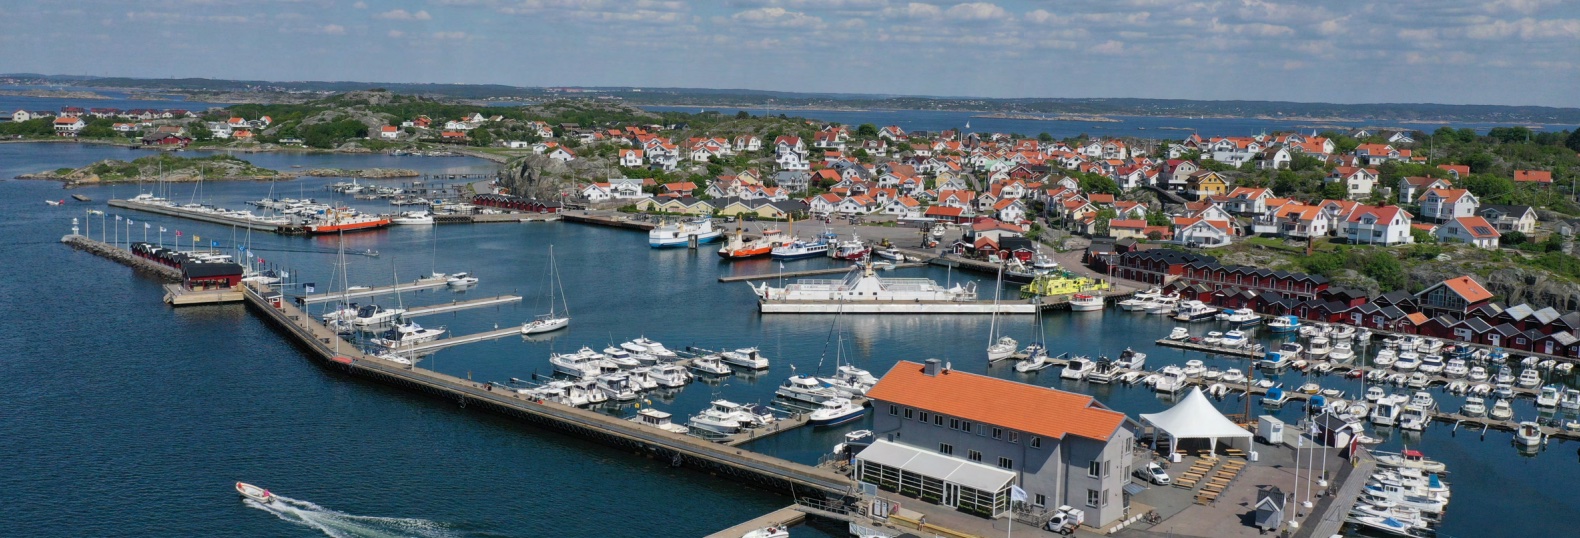 View of Donsö from above